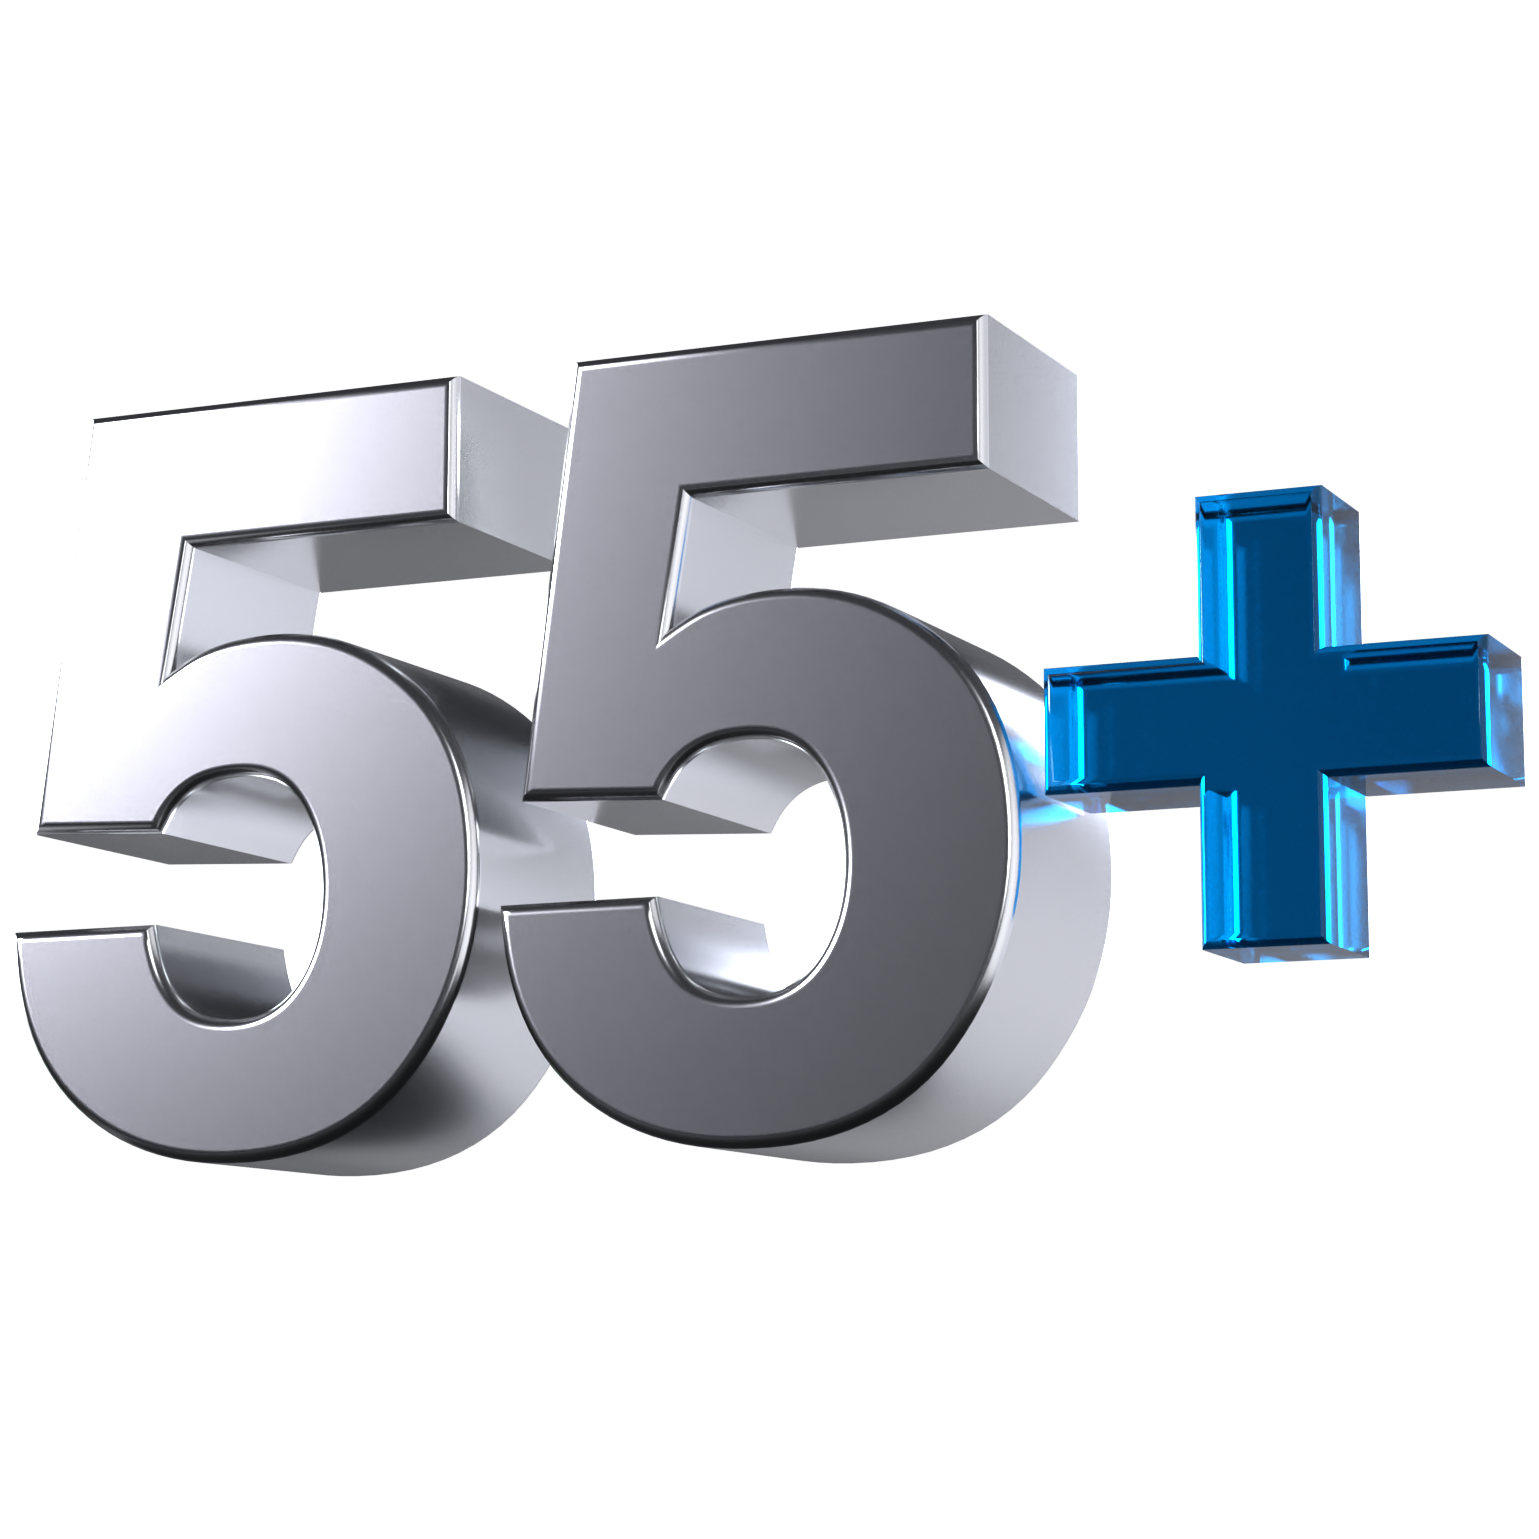 A 3D icon of the number 55 and a plus sign